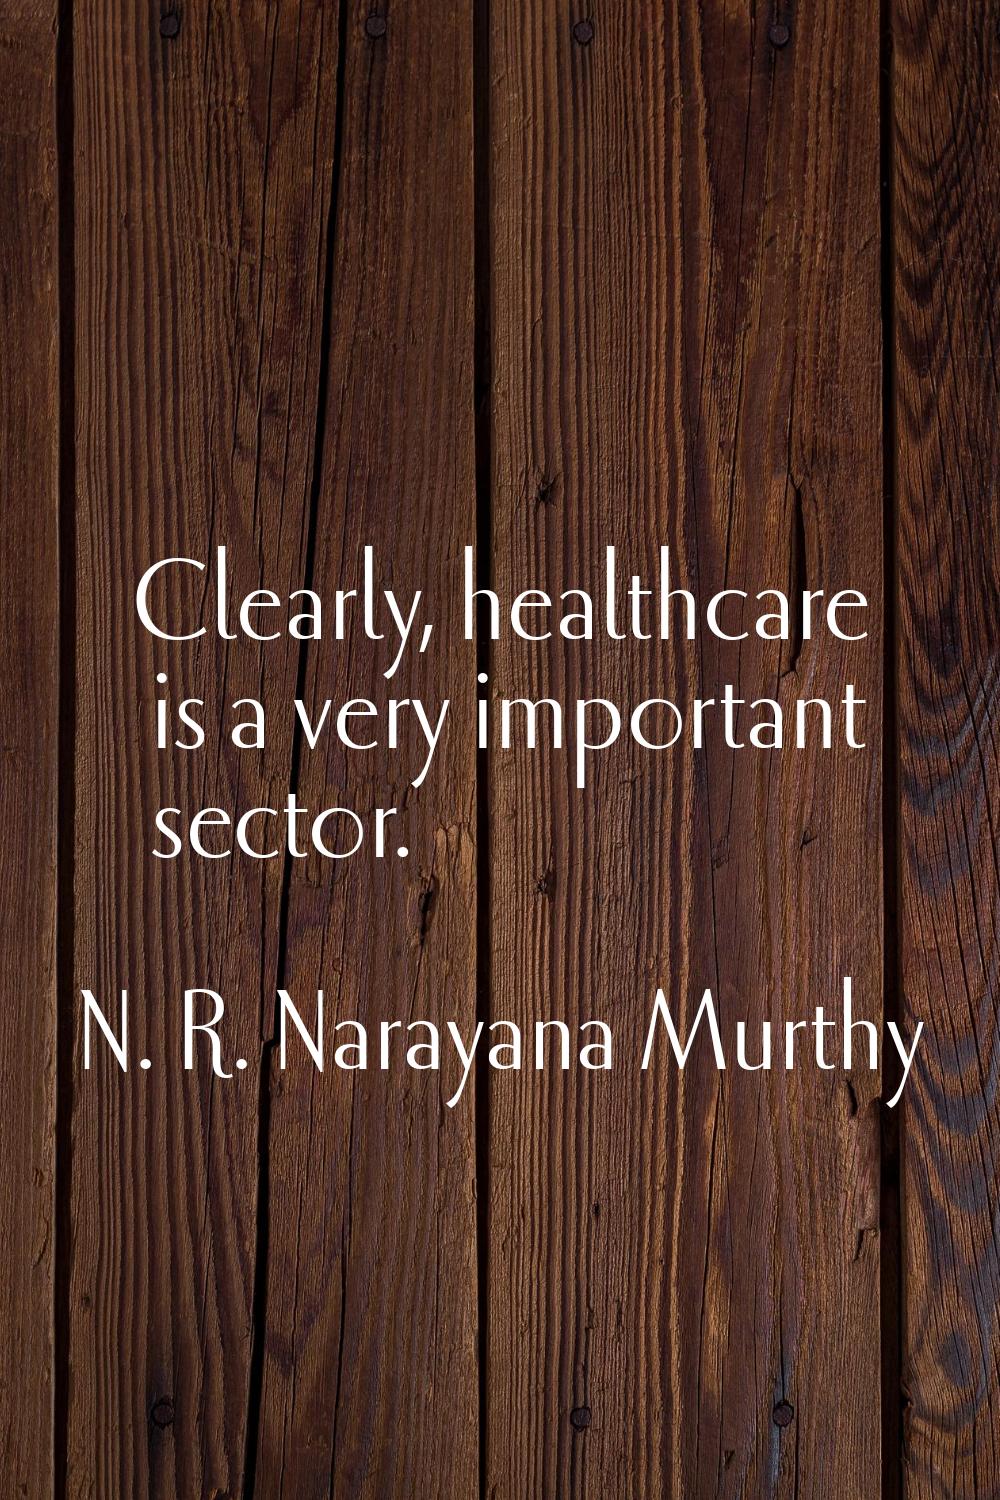 Clearly, healthcare is a very important sector.